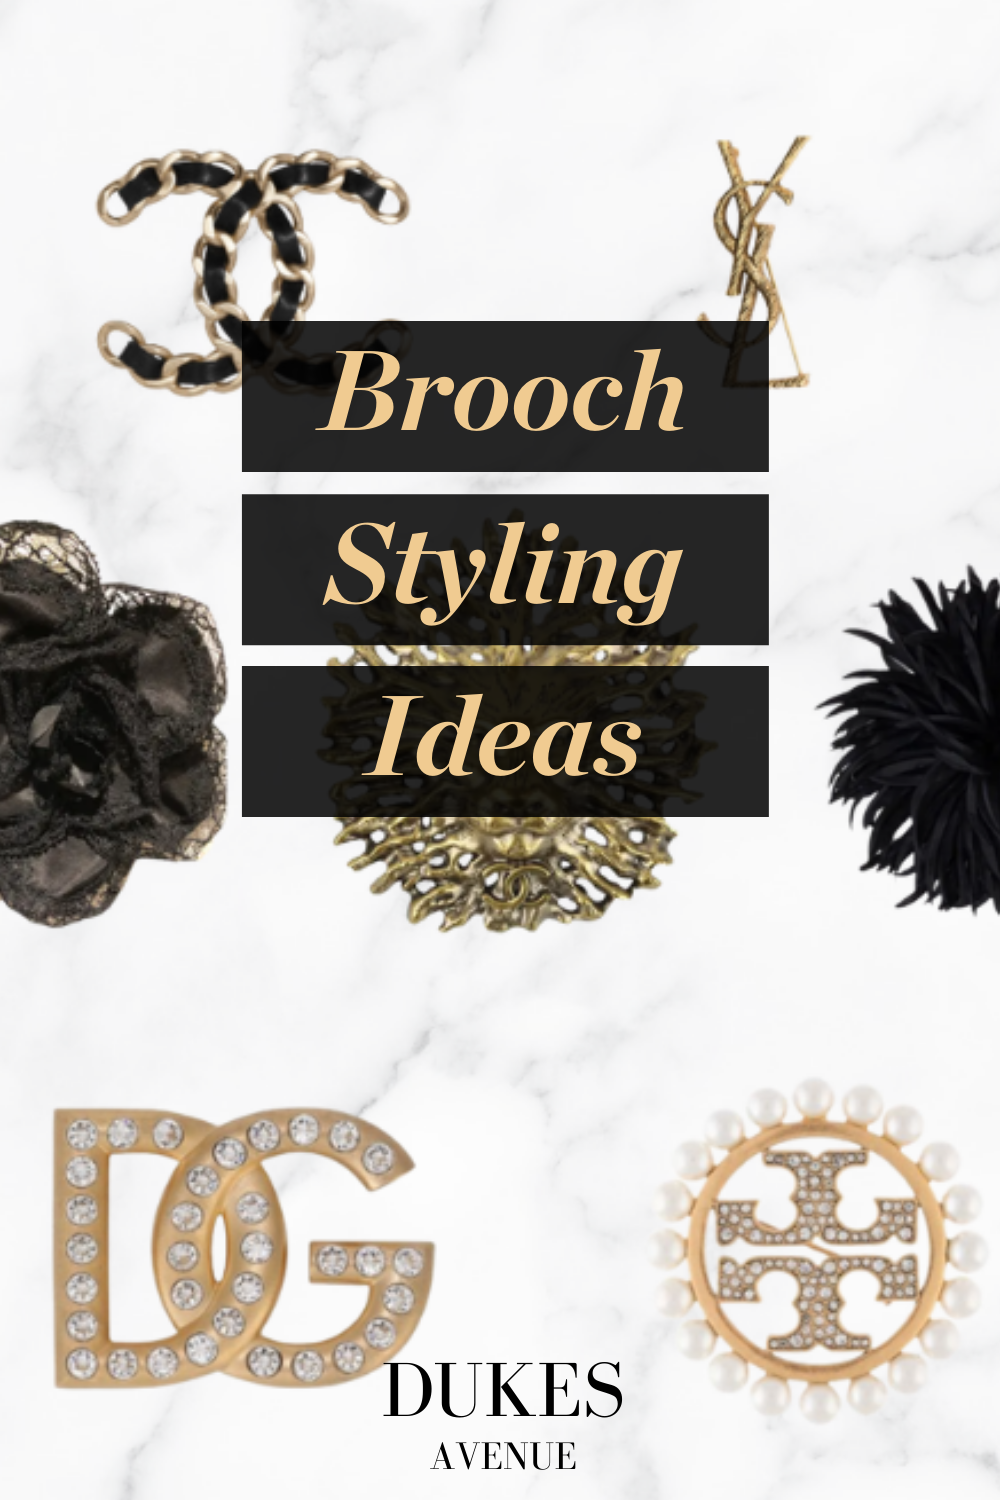 A brooch flat lay on a marble surface with text overlay "brooch styling ideas"